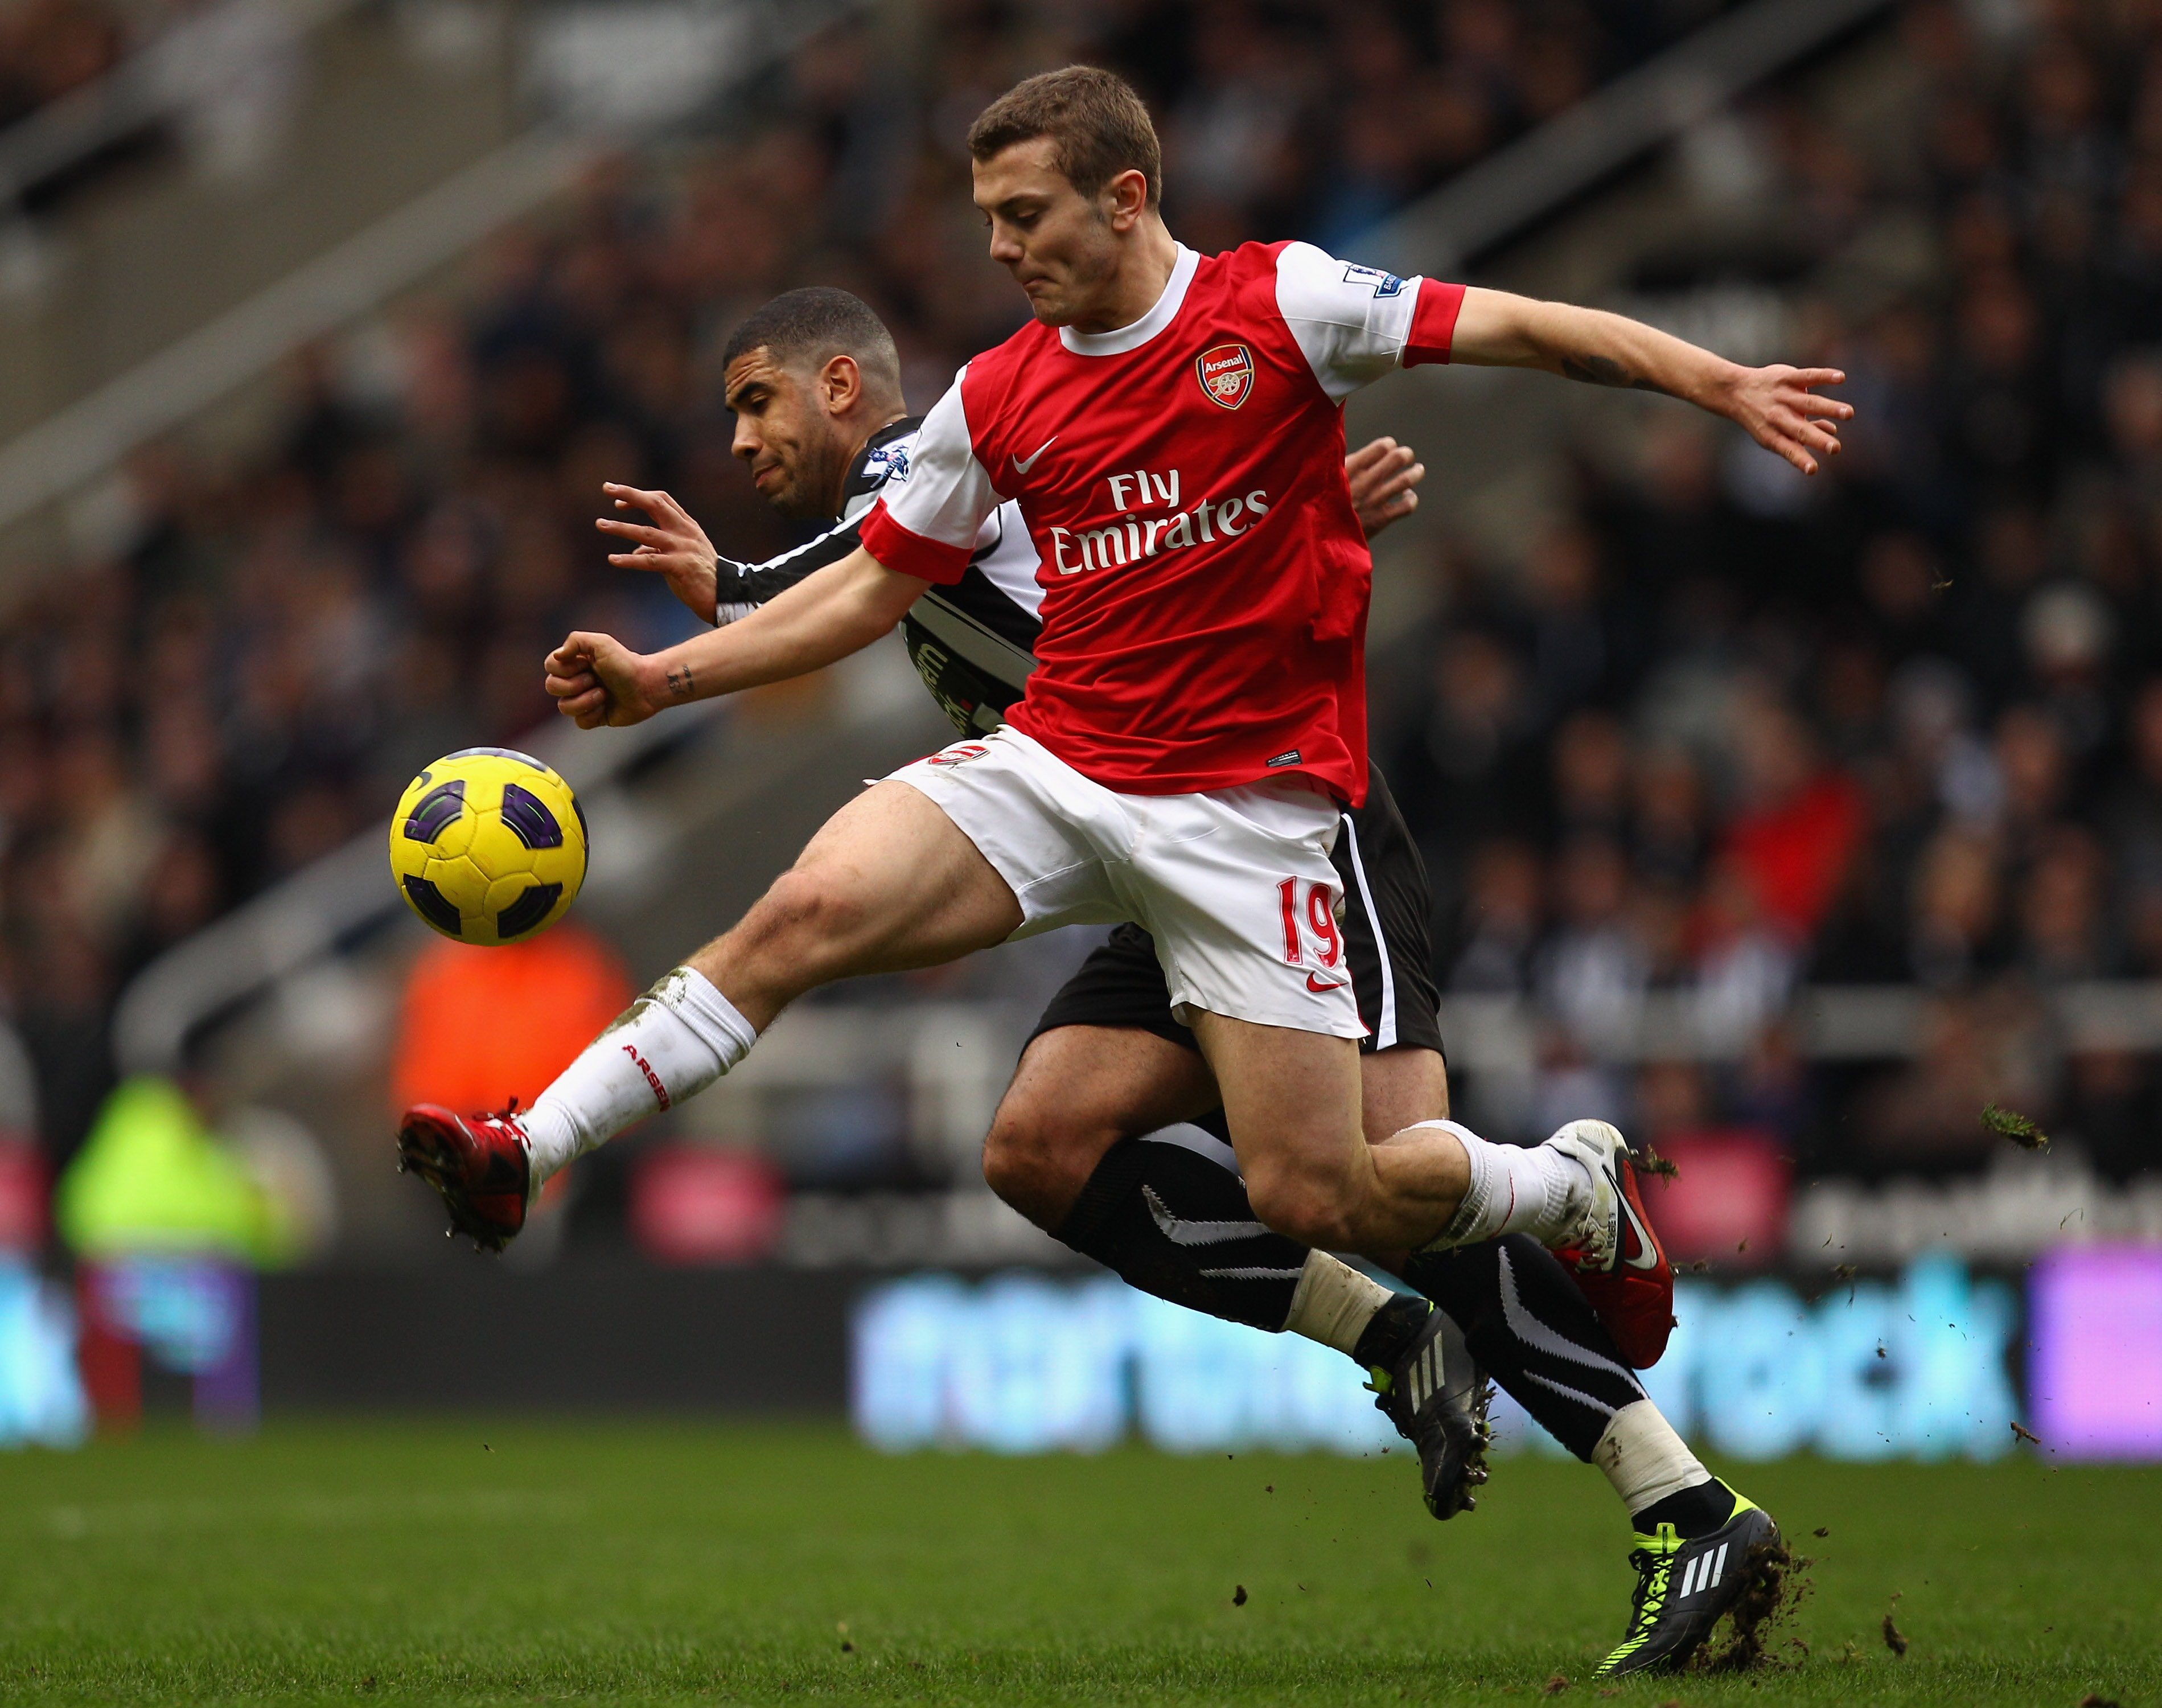 NEWCASTLE UPON TYNE, ENGLAND - FEBRUARY 05:  Jack Wilshire of Arsenal battles with Leon Best of Newcastle during the Barclays Premier League match between Newcastle United and Arsenal at St James' Park on February 5, 2011 in Newcastle upon Tyne, England.